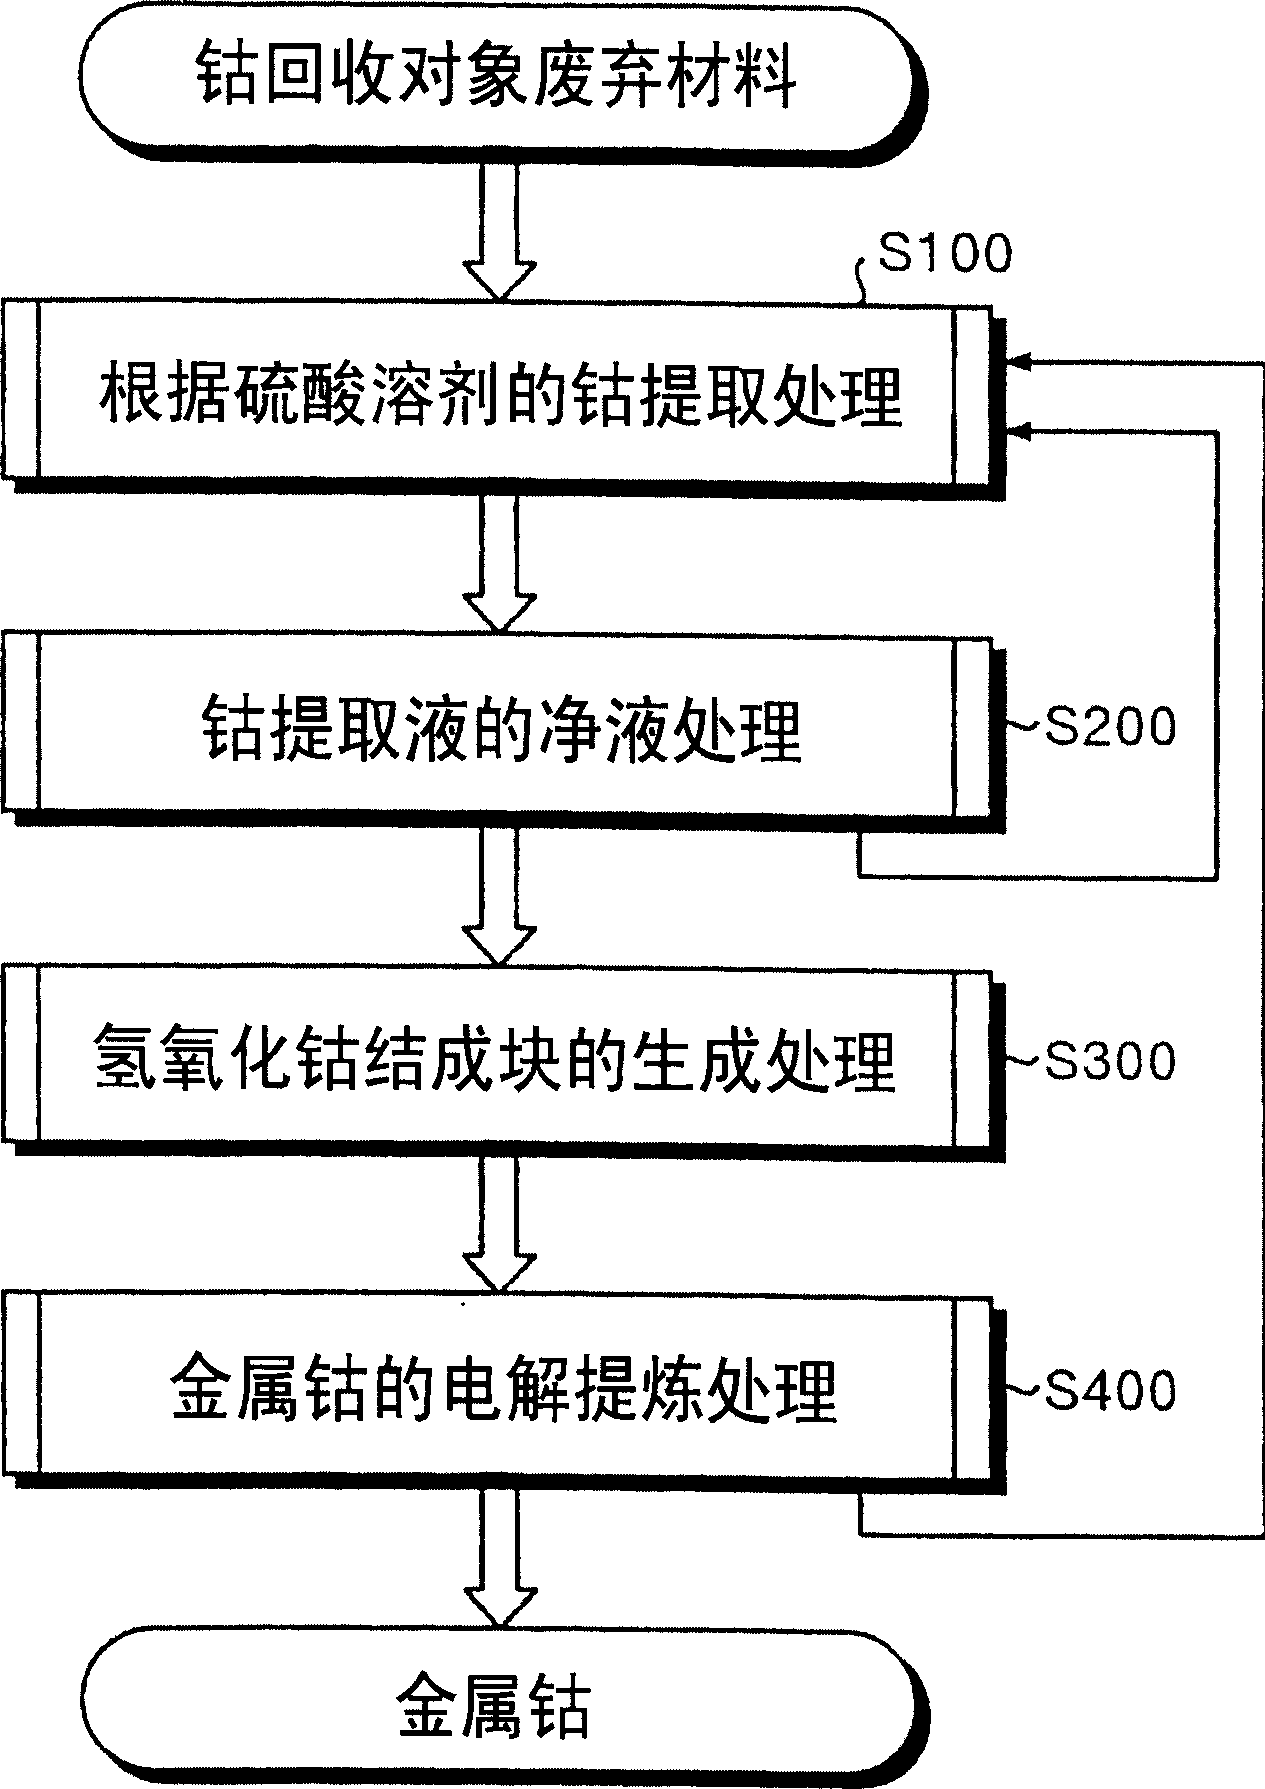 Method of recovering cobalt from lithium ion battery and cobalt recovering system